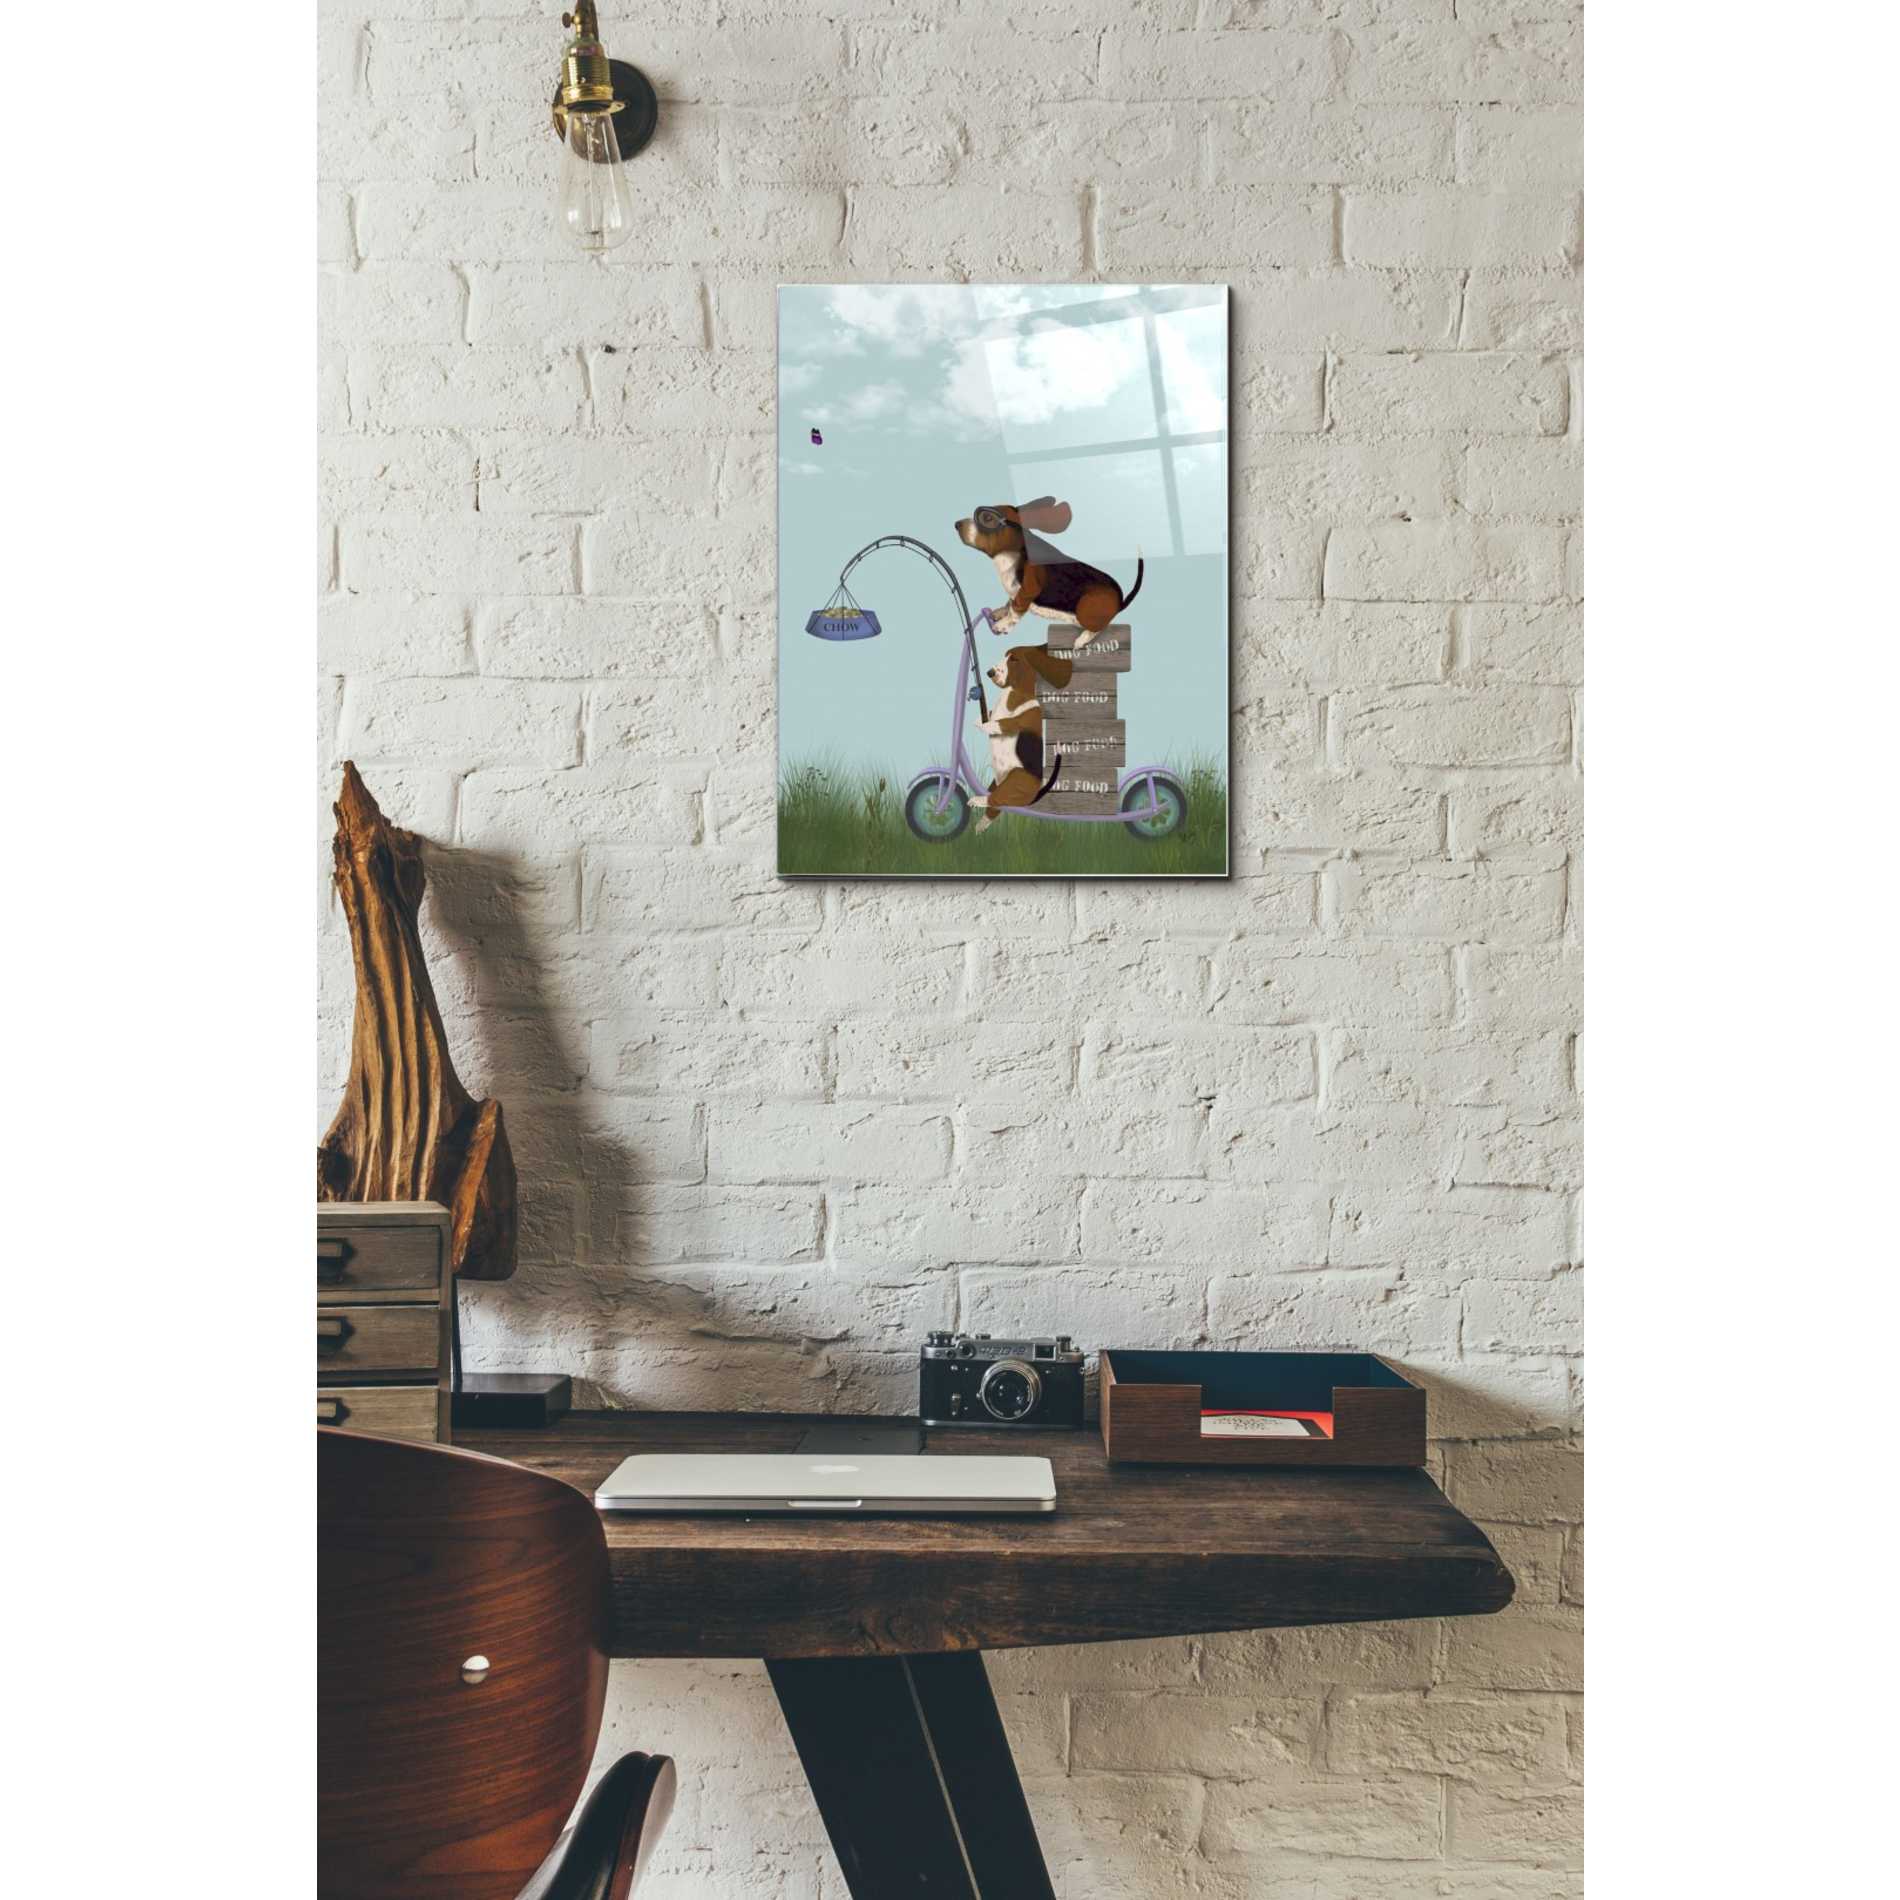 Epic Art 'Basset Hound Scooter' by Fab Funky Acrylic Glass Wall Art,12x16